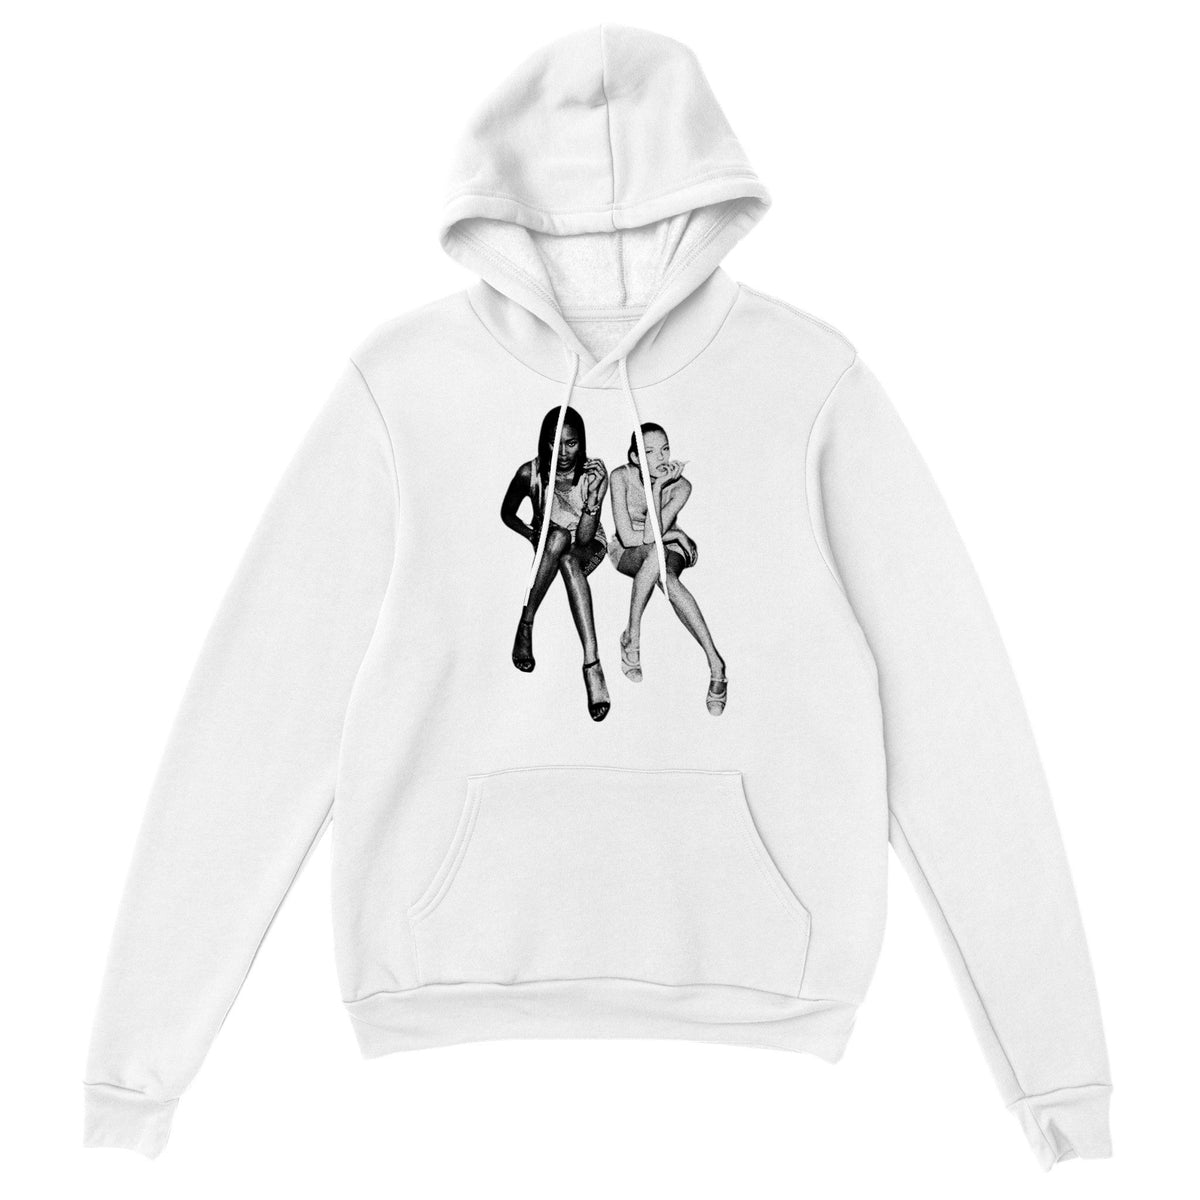 'After Party' hoodie